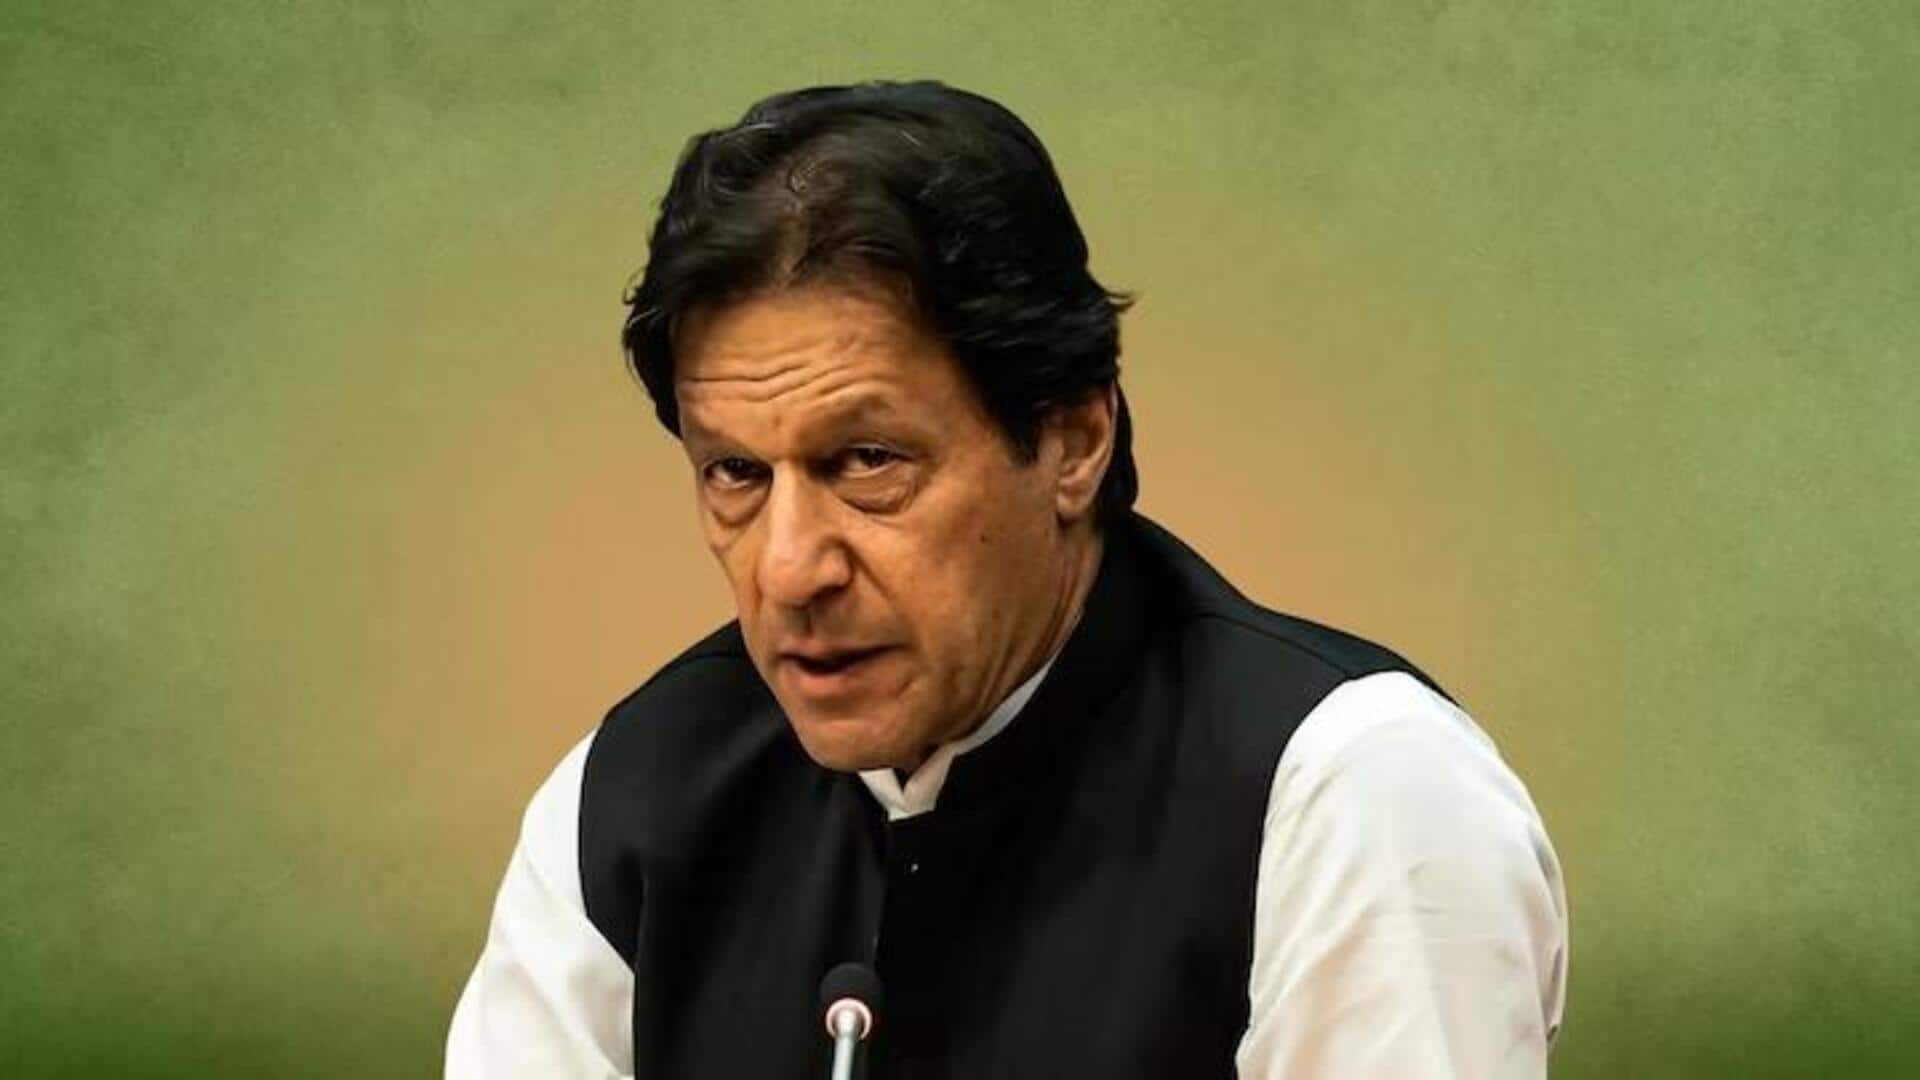 Pakistan: Interim bail extended for Imran Khan in three cases